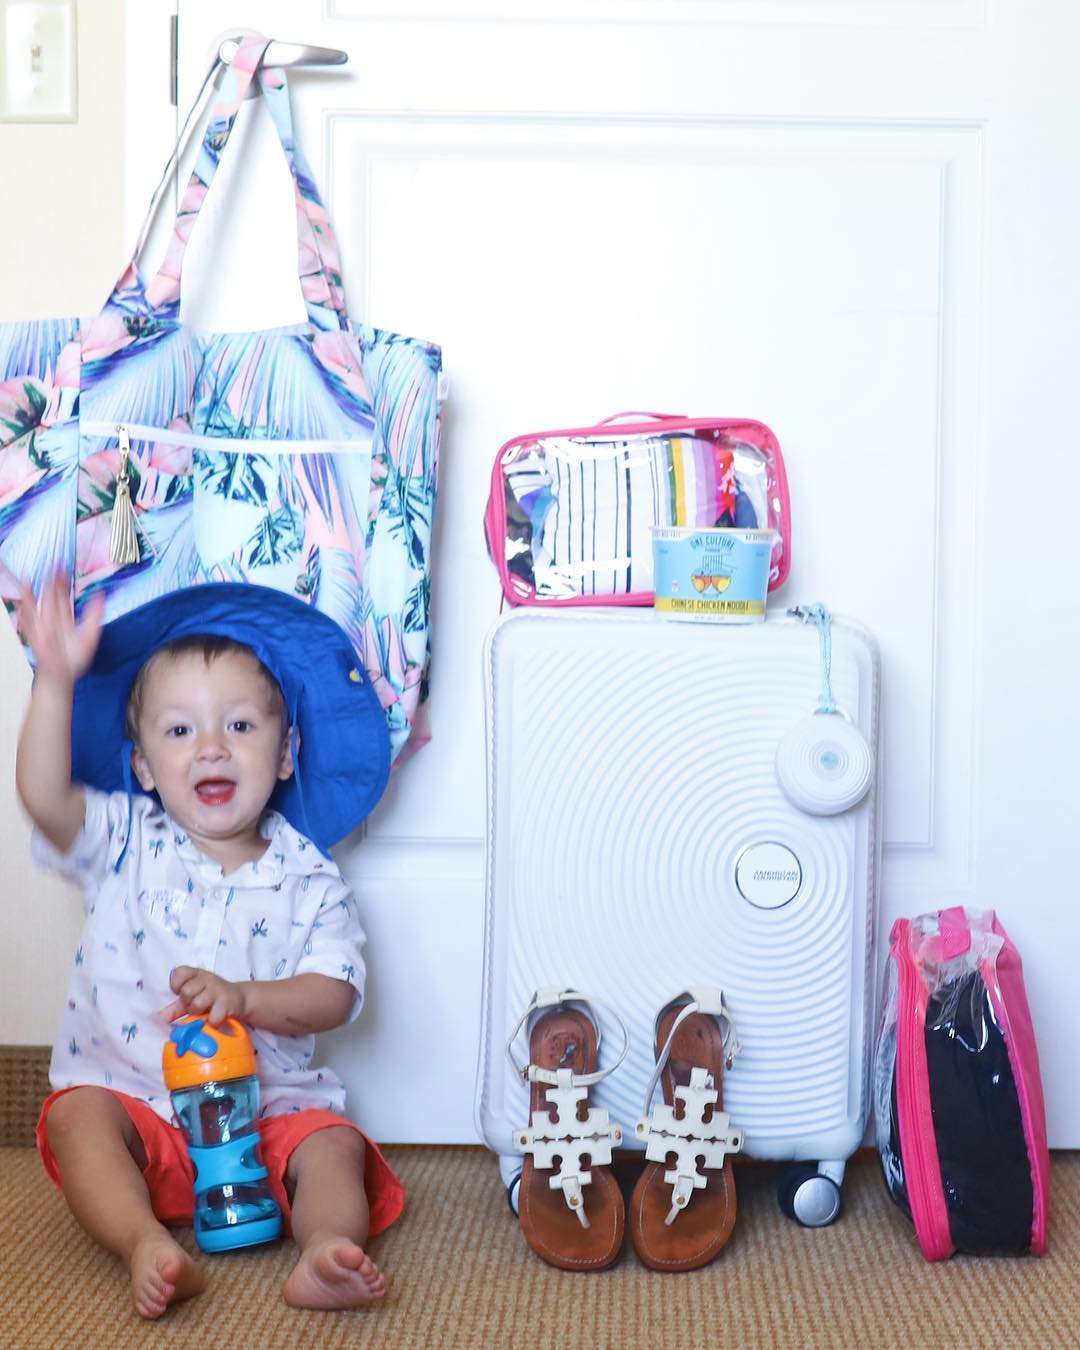 Baby beside packed essentials for a trip